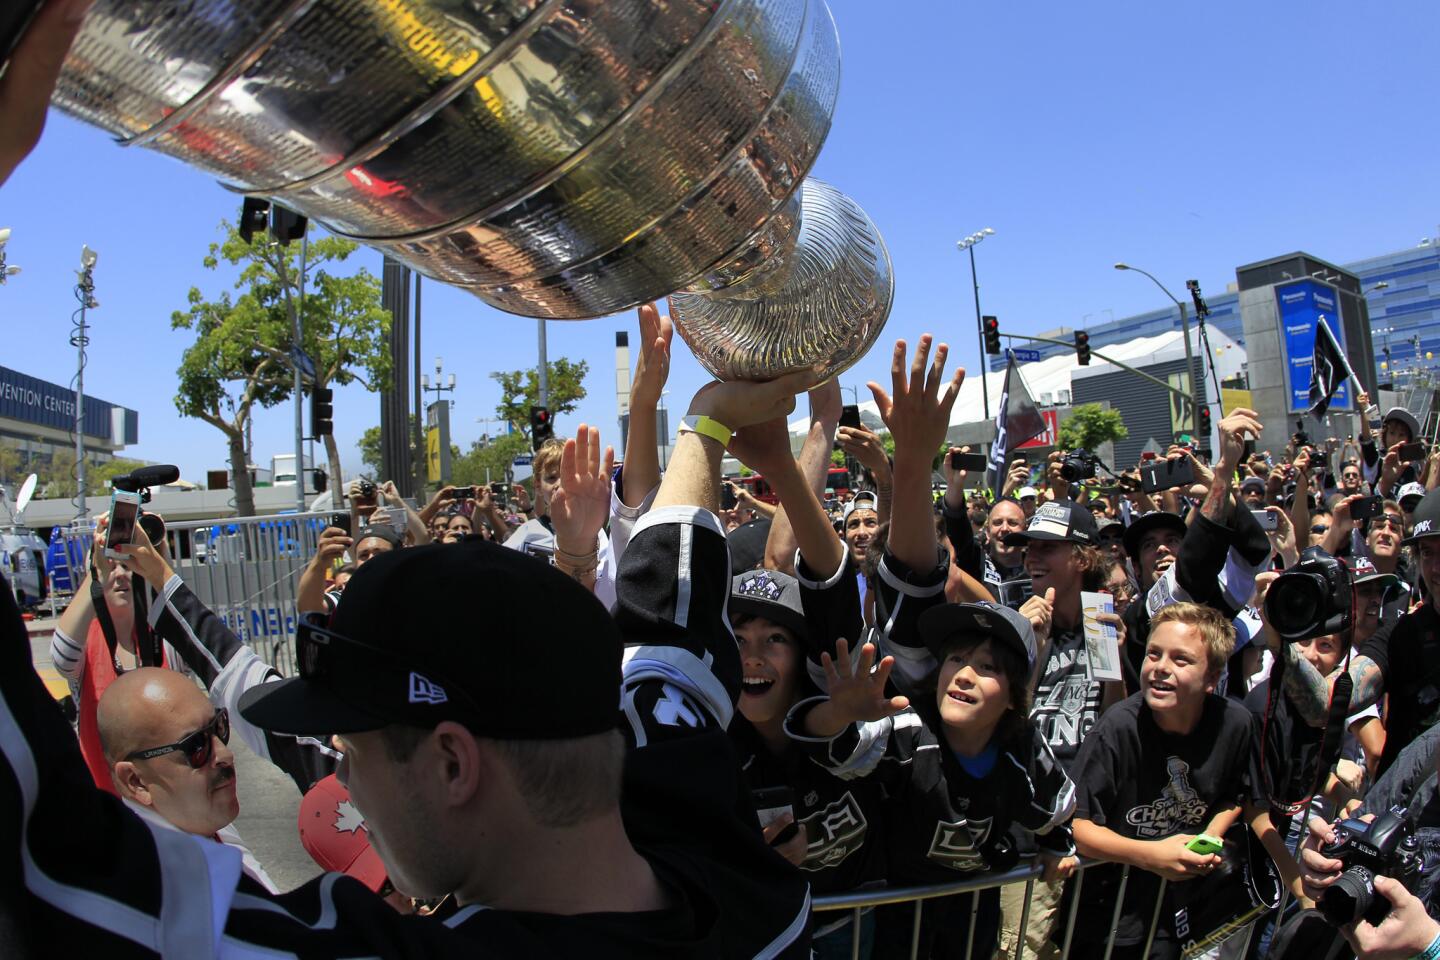 Beach cities turn out for their local Kings during Stanley Cup